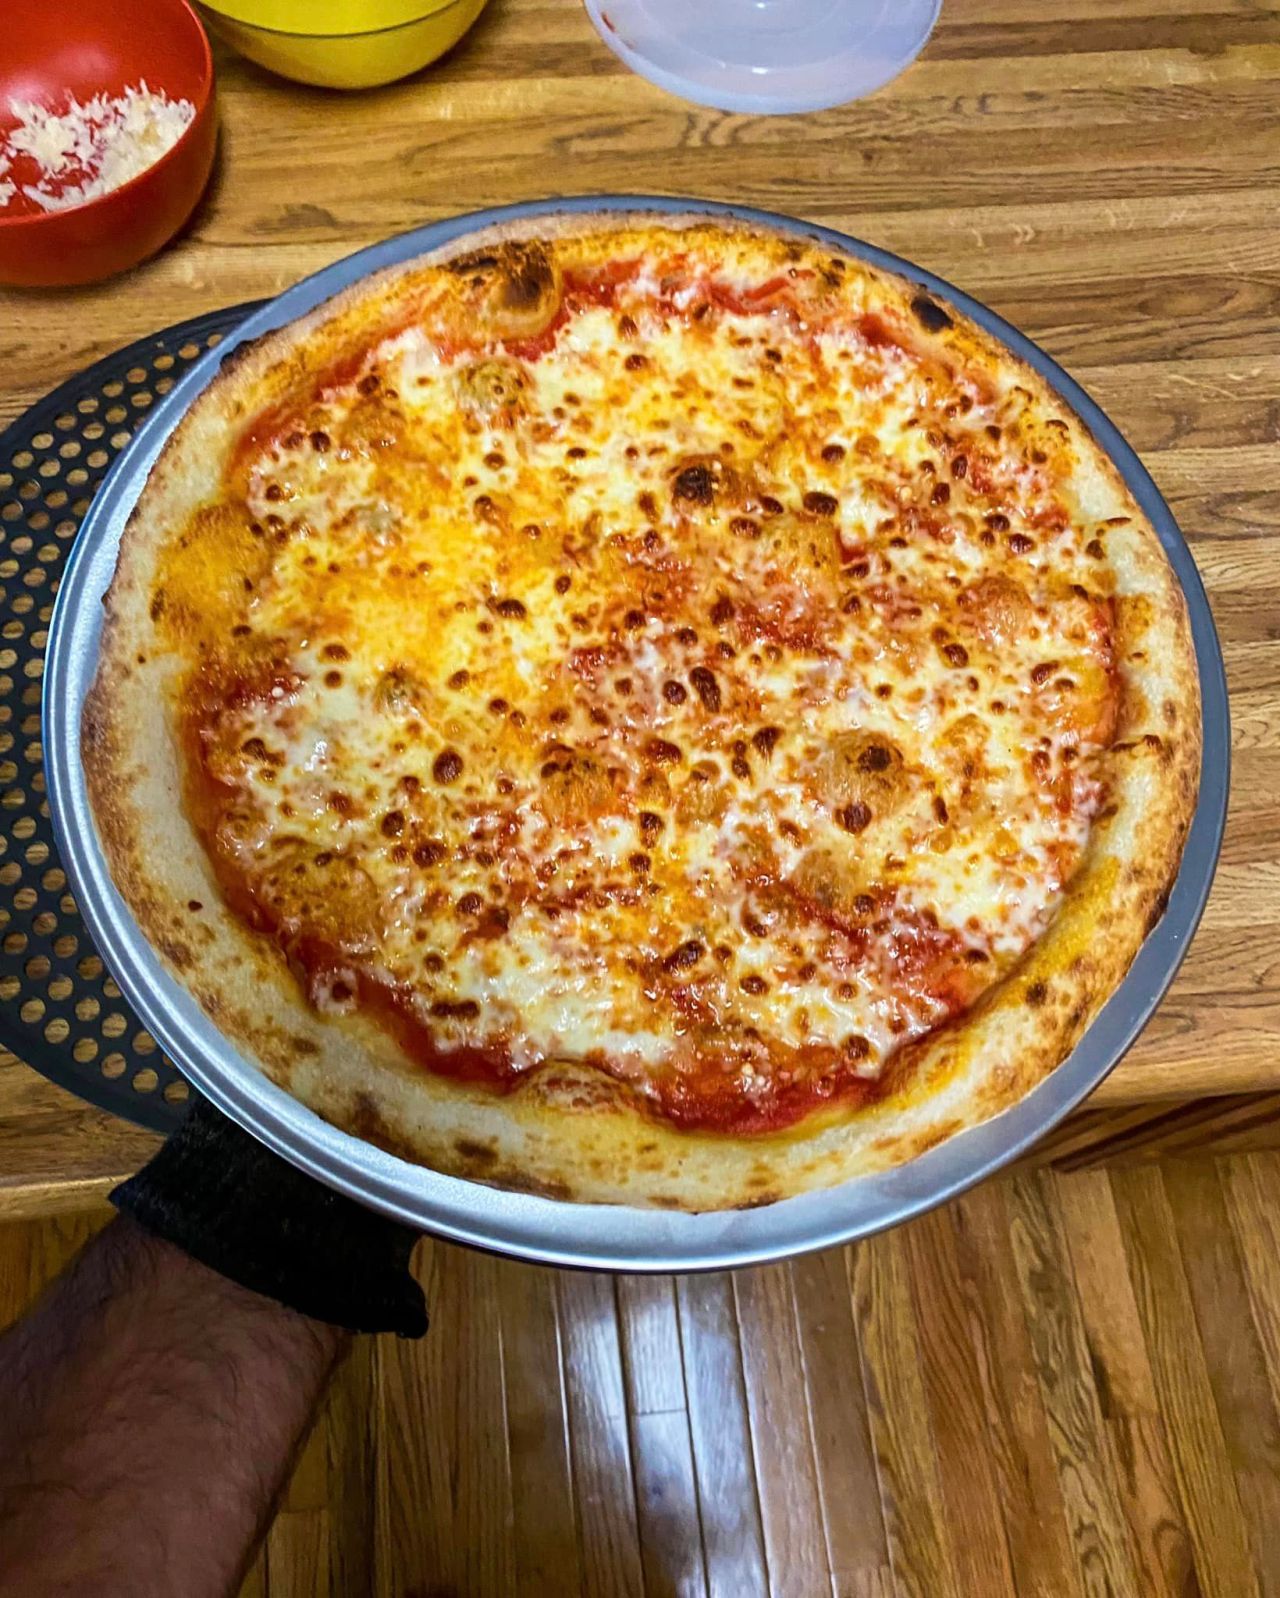 New York style cheese pizza from the Halo Versa 16